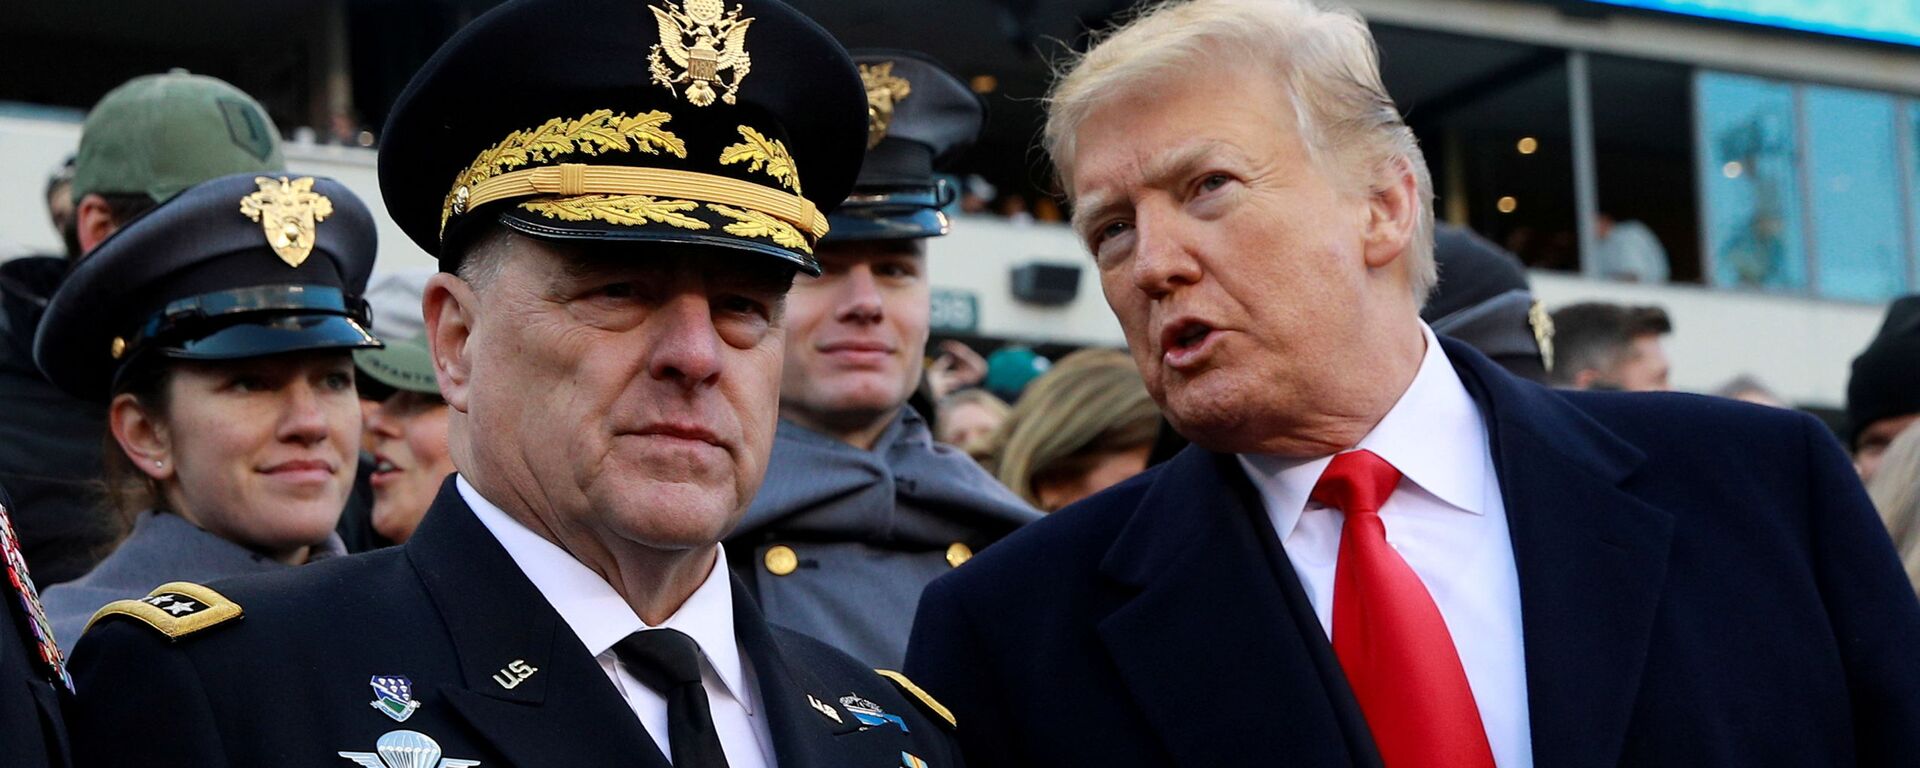  U.S. President Donald Trump and Gen. Mark Milley, Chief of Staff of the United States Army, speak at the 119th Army-Navy football game at Lincoln Financial Field in Philadelphia, Pennsylvania, U.S. December 8, 2018 - Sputnik International, 1920, 22.07.2021